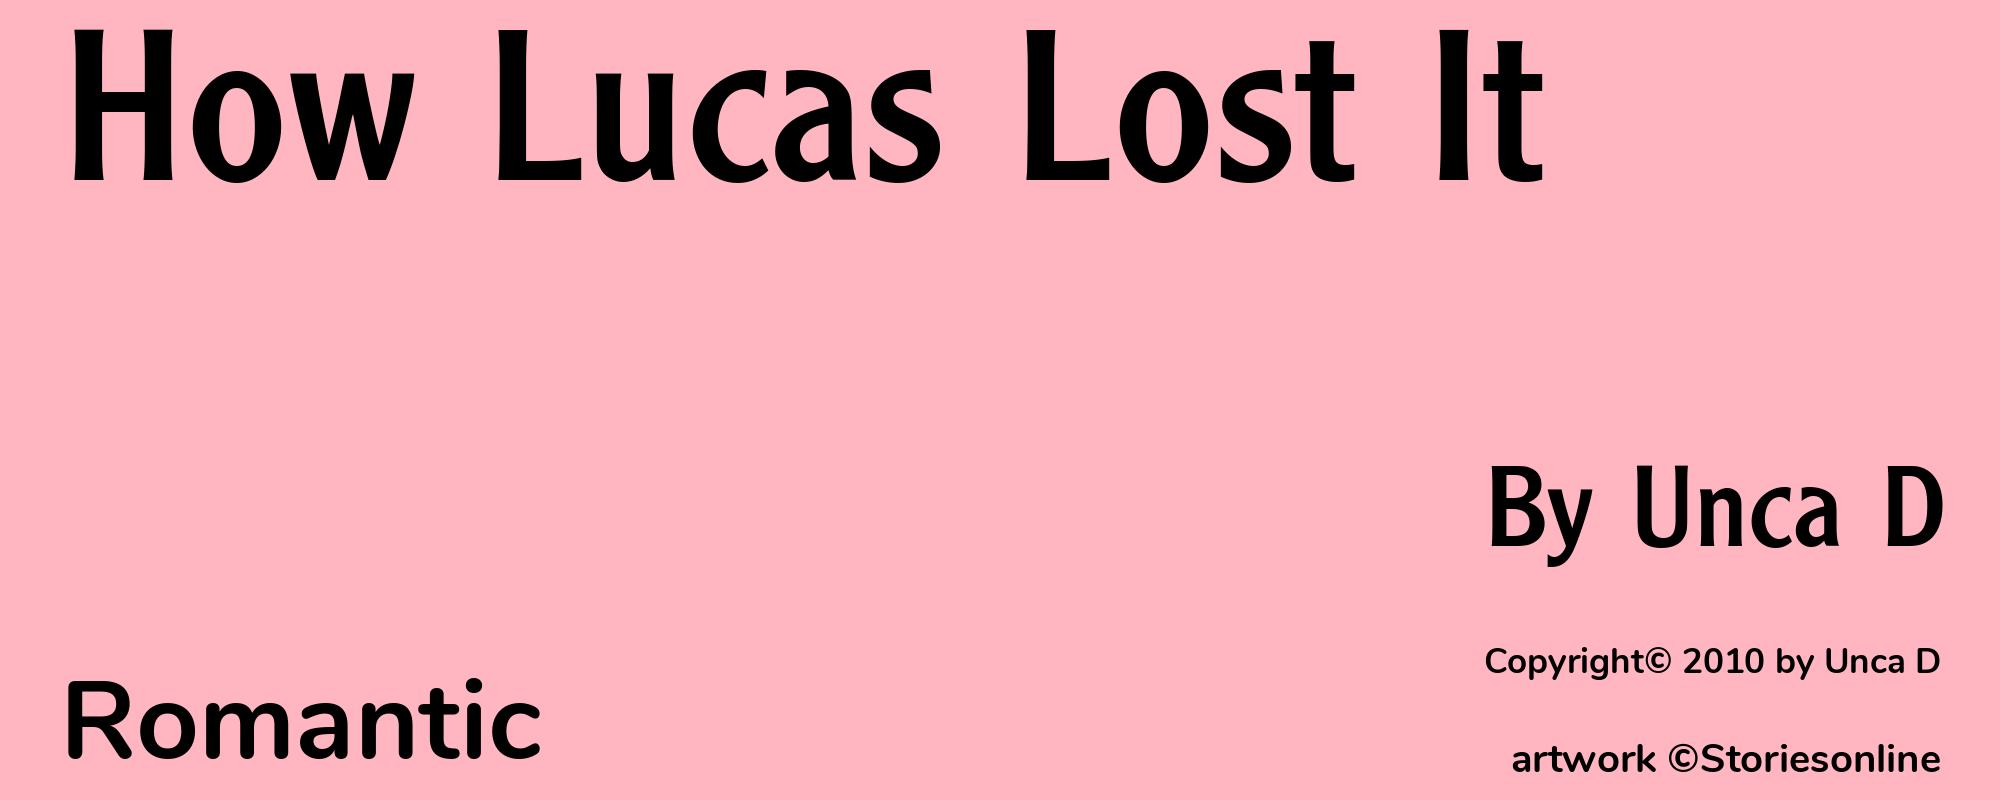 How Lucas Lost It - Cover